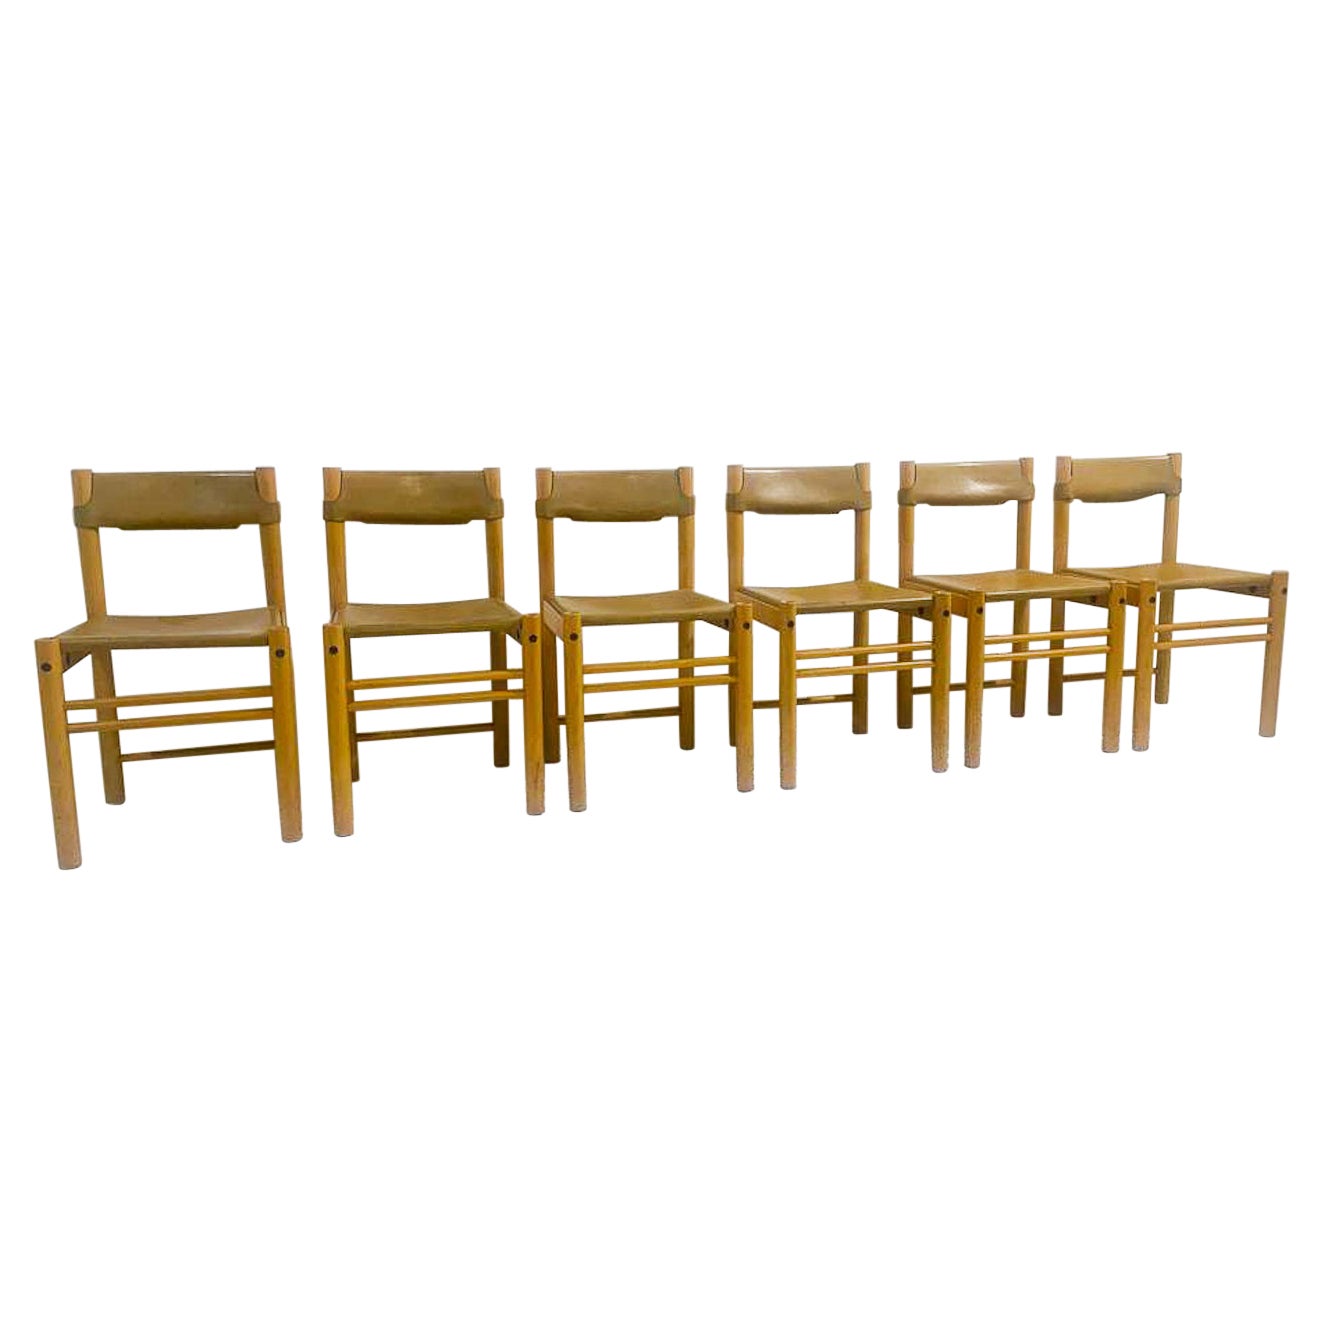 Mid-Century Modern Set of 6 Wood and Leather Chairs, Italy, 1960s